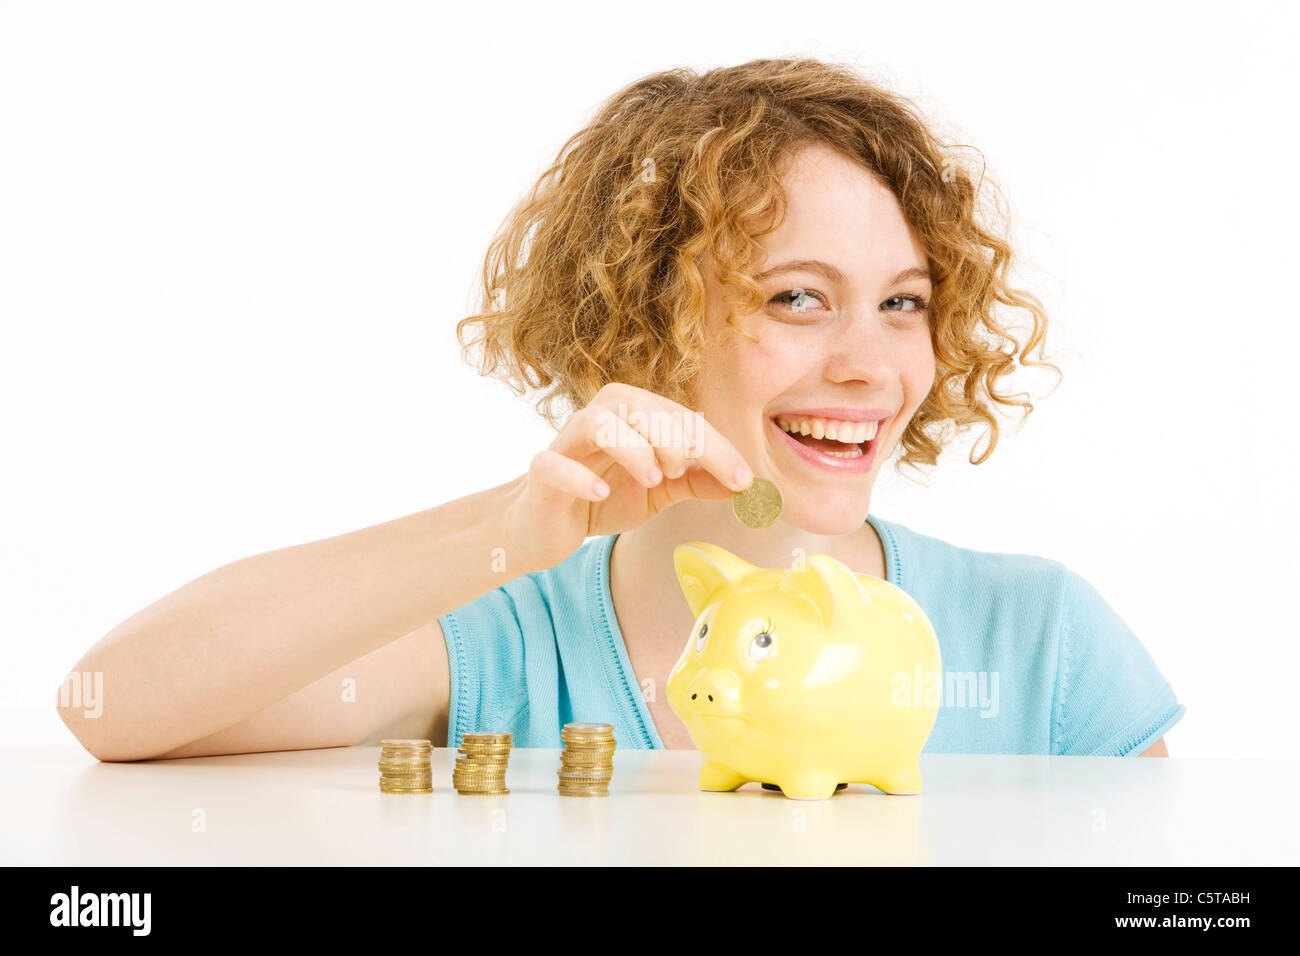 Young woman with Euro coins and piggy bank, smiling, portrait Stock Photo